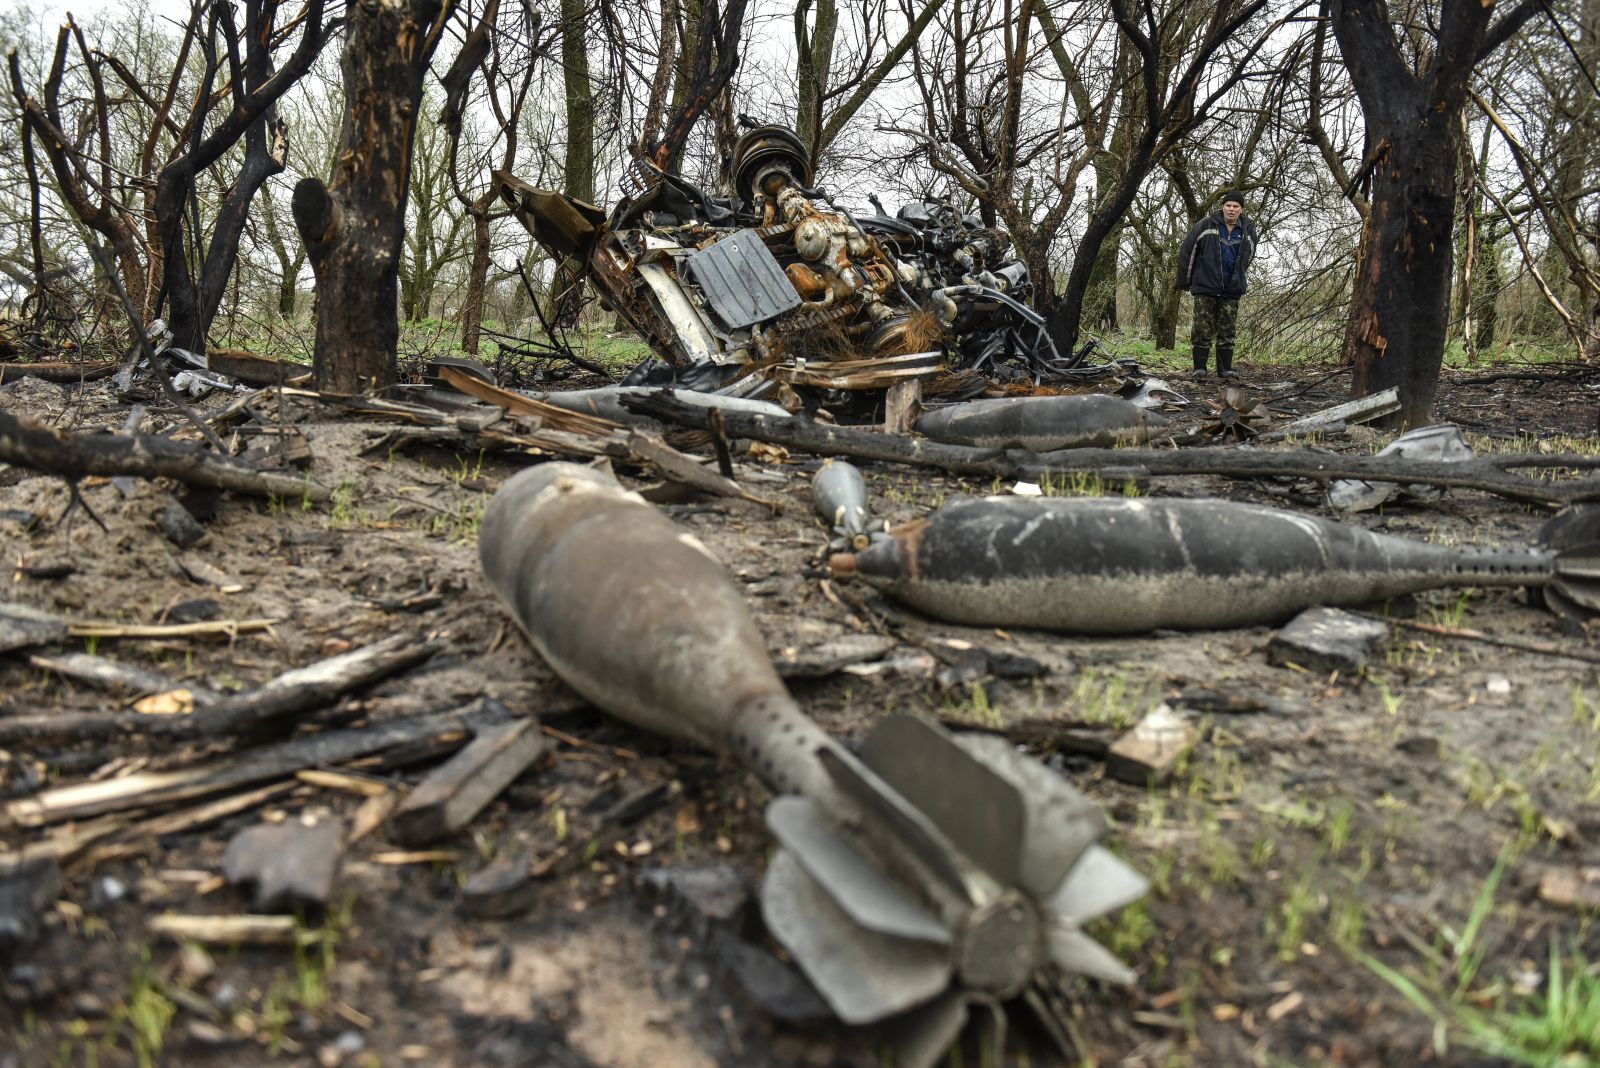 epa09898952 A local man looks at rest of bombs that litters a field in Ivanivka village, Chernihiv region, UKraine, 20 April 2022. On 24 February Russian troops had entered Ukrainian territory resulting in fighting and destruction in the country, a huge flow of refugees, and multiple sanctions against Russia.  EPA/OLEG PETRASYUK